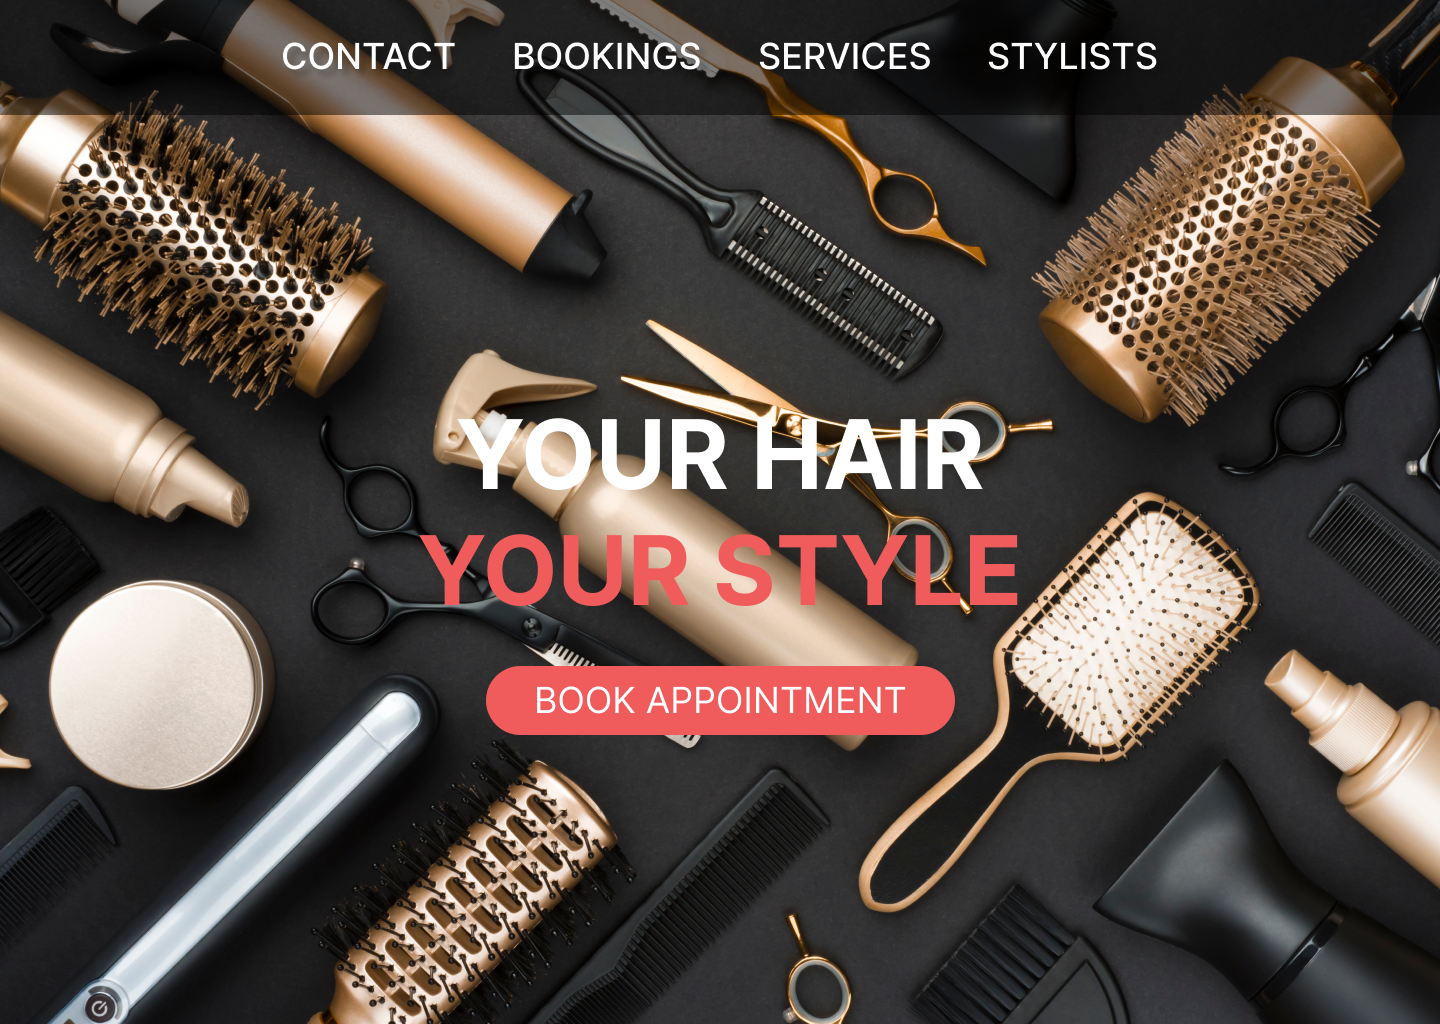 example salon business landing page